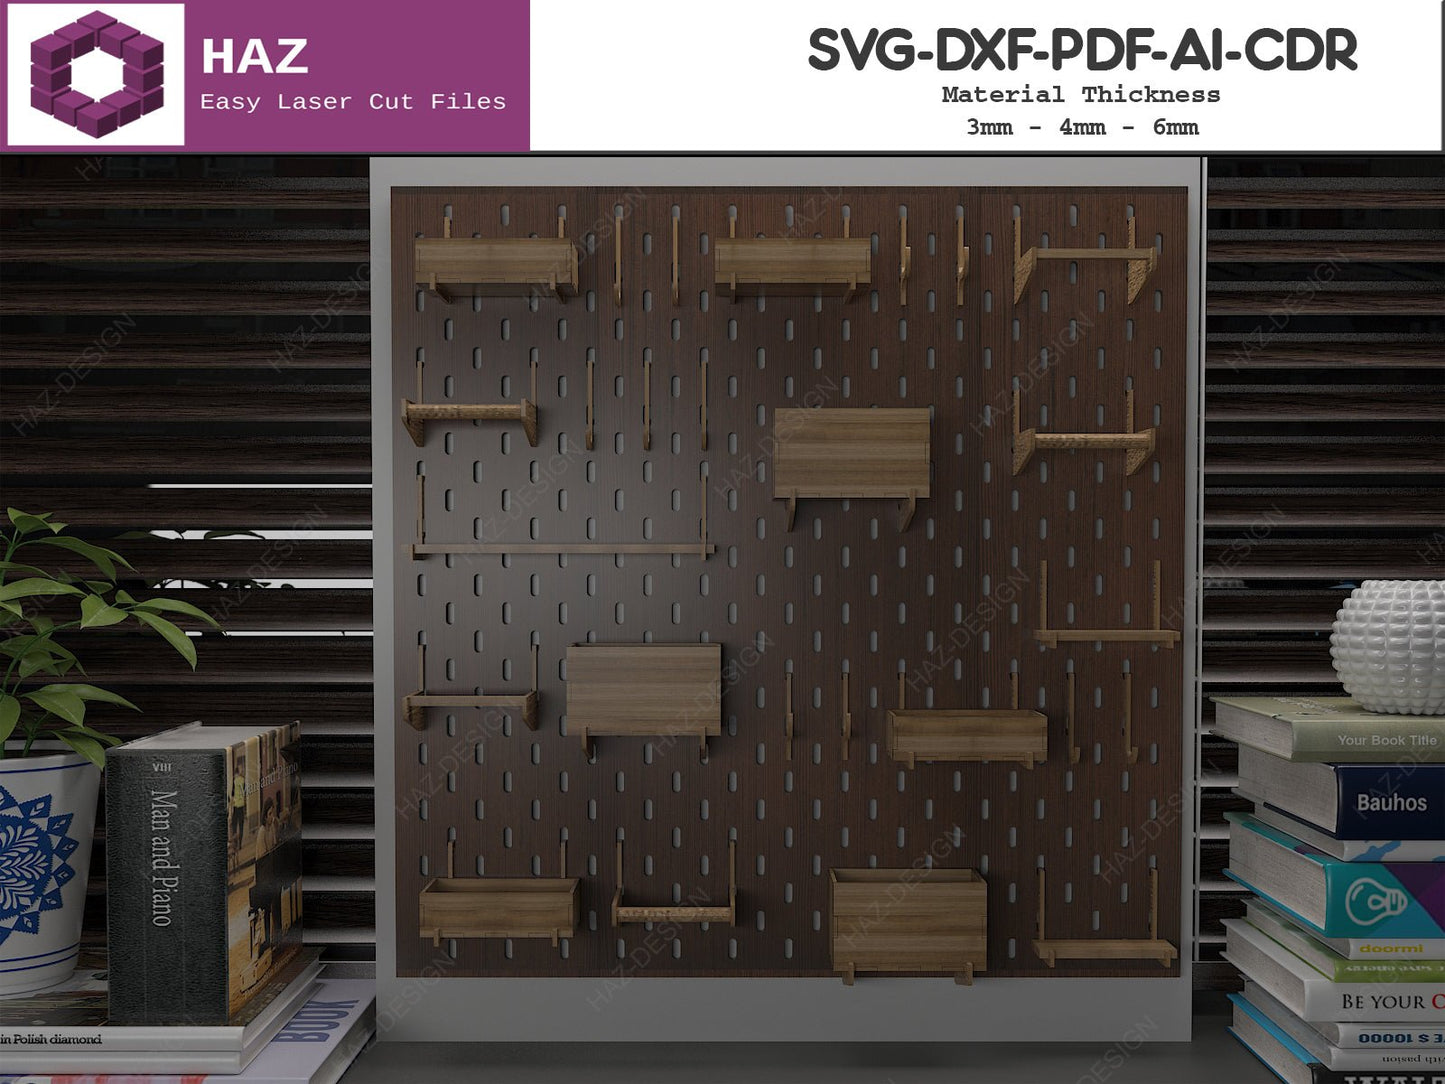 2 Size Perforated Peg Board and Hooks / Wooden Pegboard With Accessories / Wall Organizer Shelves SVG Ai DXF CDR 082